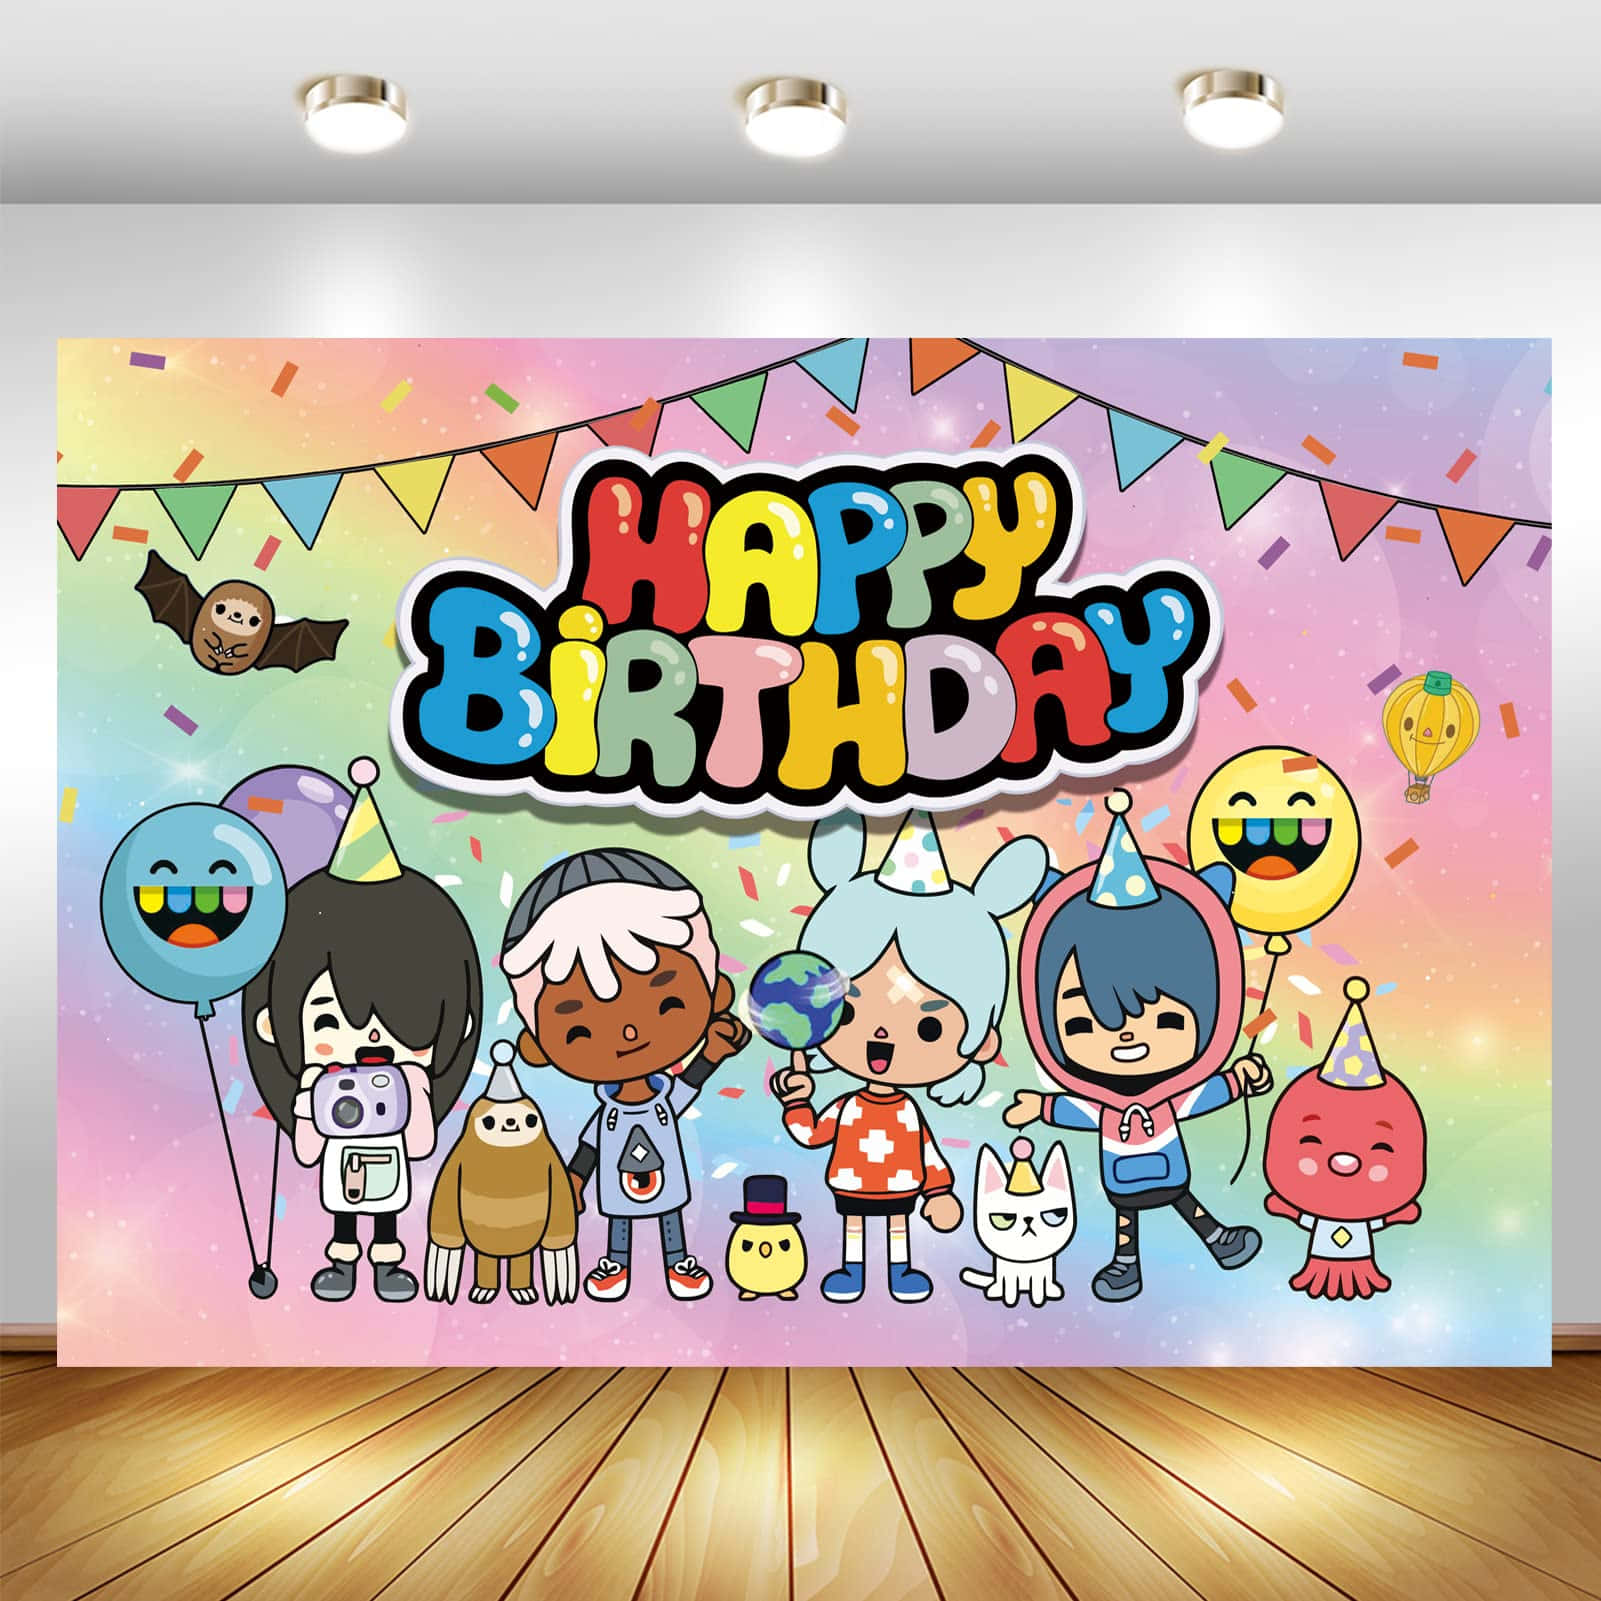 Wallpaper Toca world::Appstore for Android